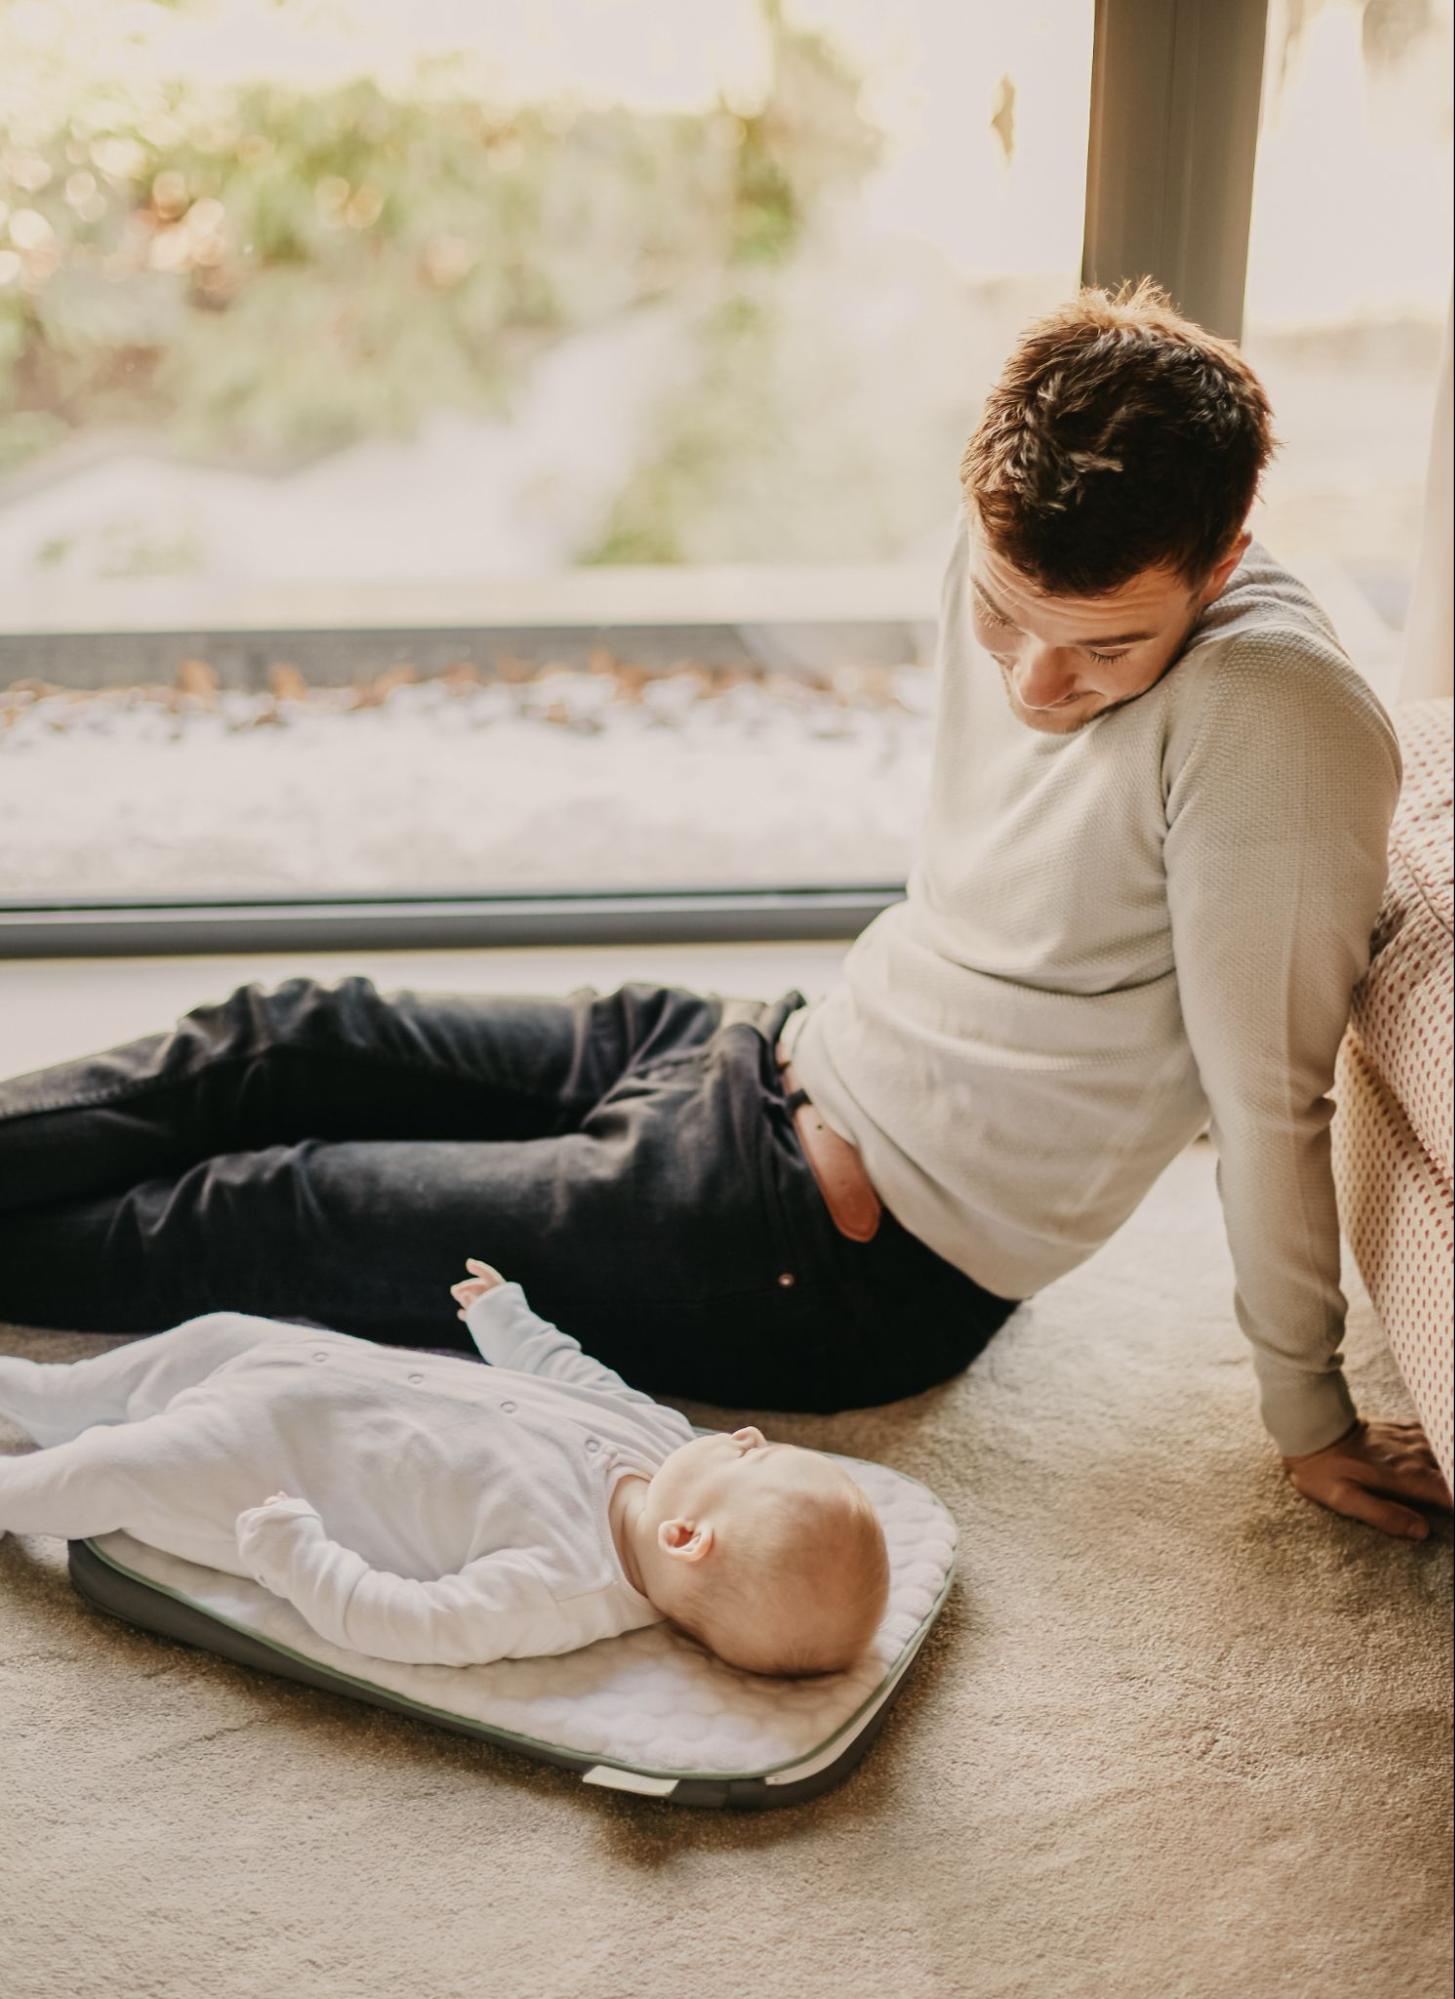 A man gently cradling a baby on a mat on the floor.